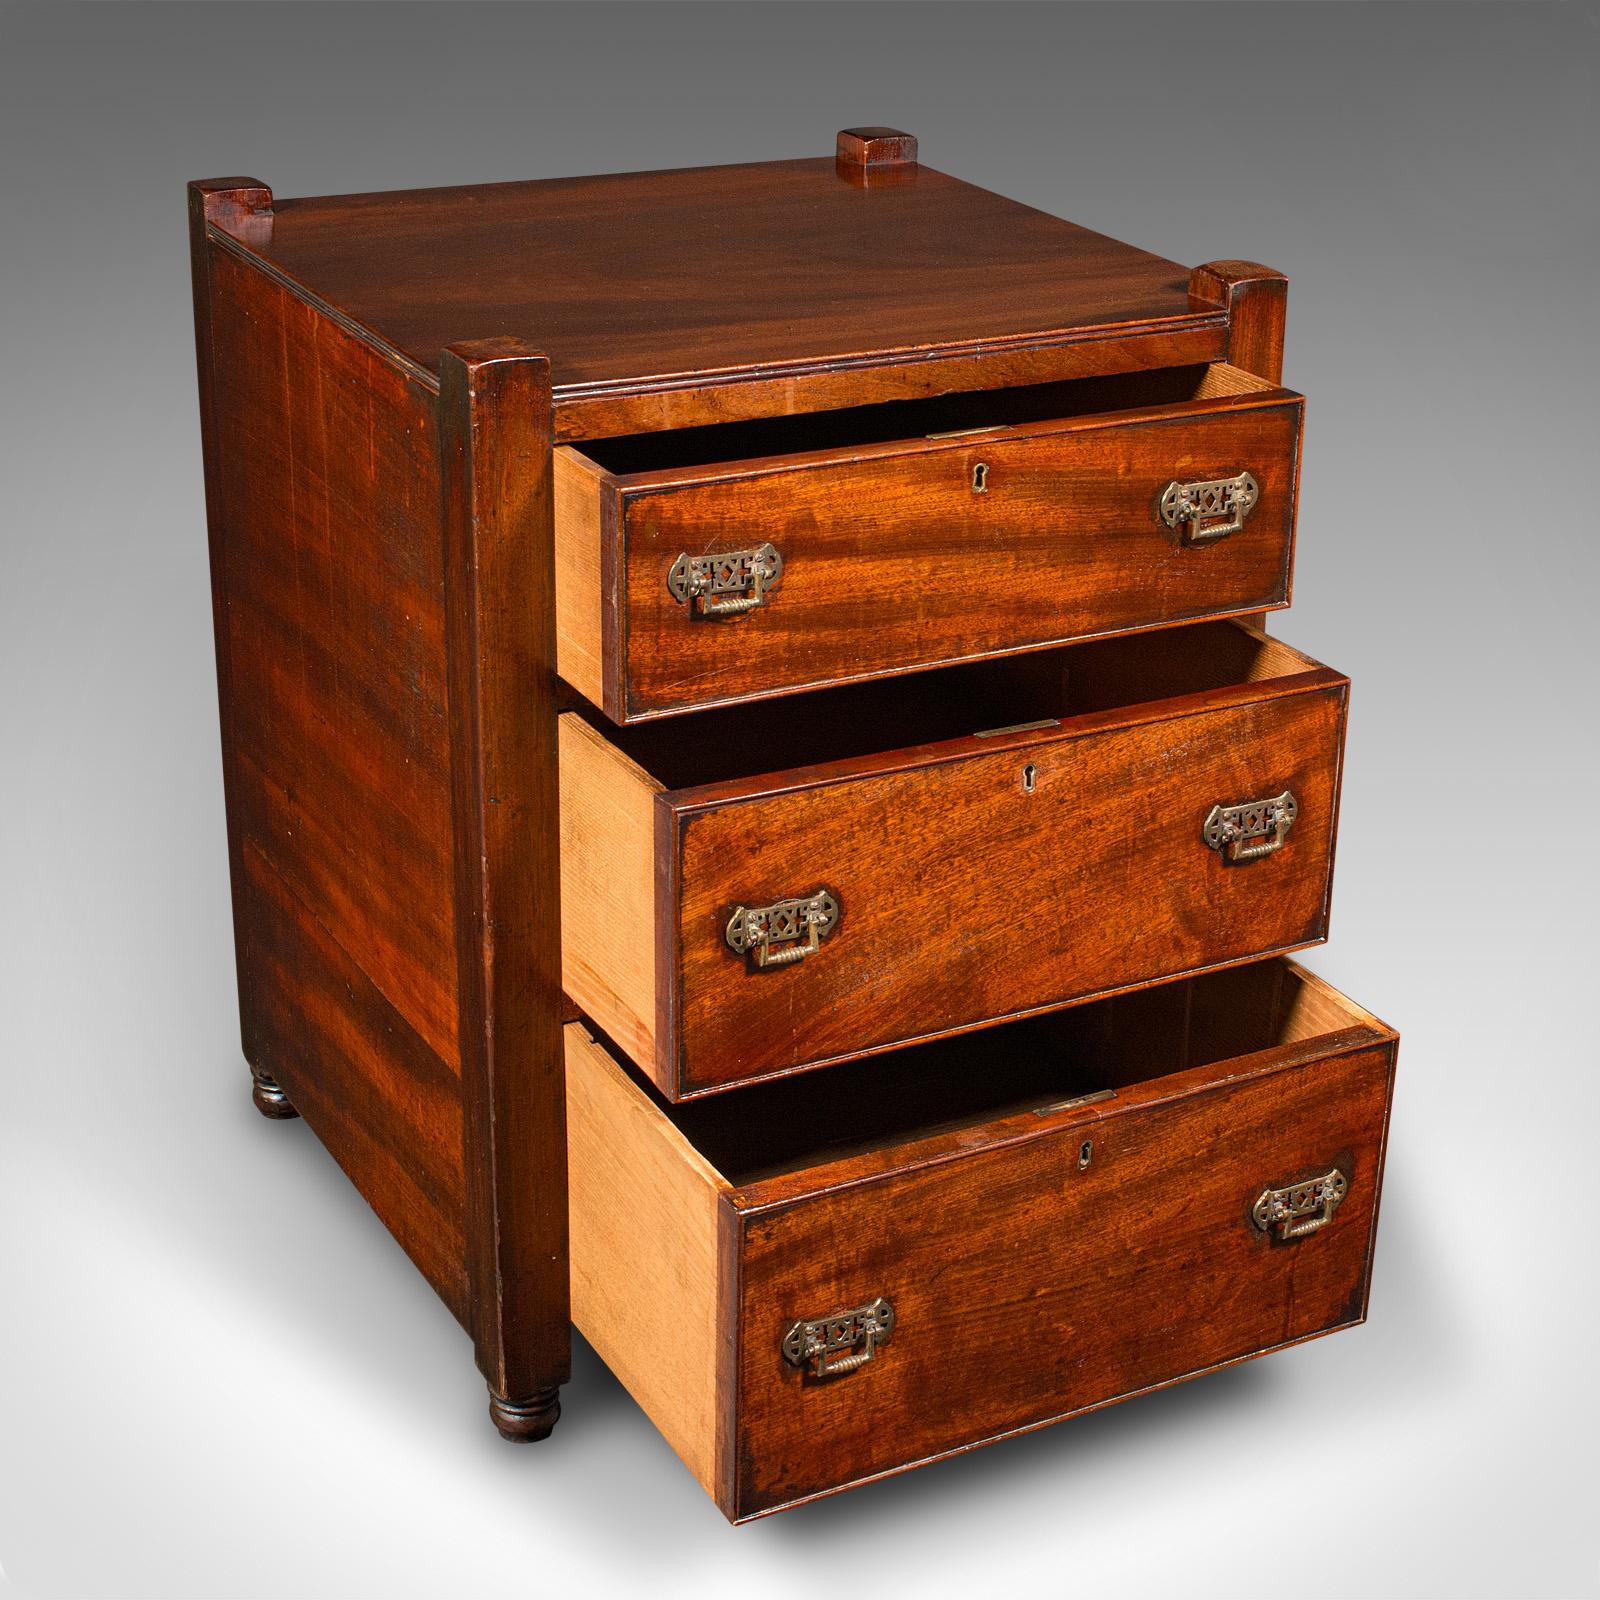 This is an antique gentleman's nightstand. An English, mahogany bedside chest of drawers, dating to the Georgian period and later, circa 1780.

Appealingly figured bedroom nightstand with useful proportion
Displays a desirable aged patina and in